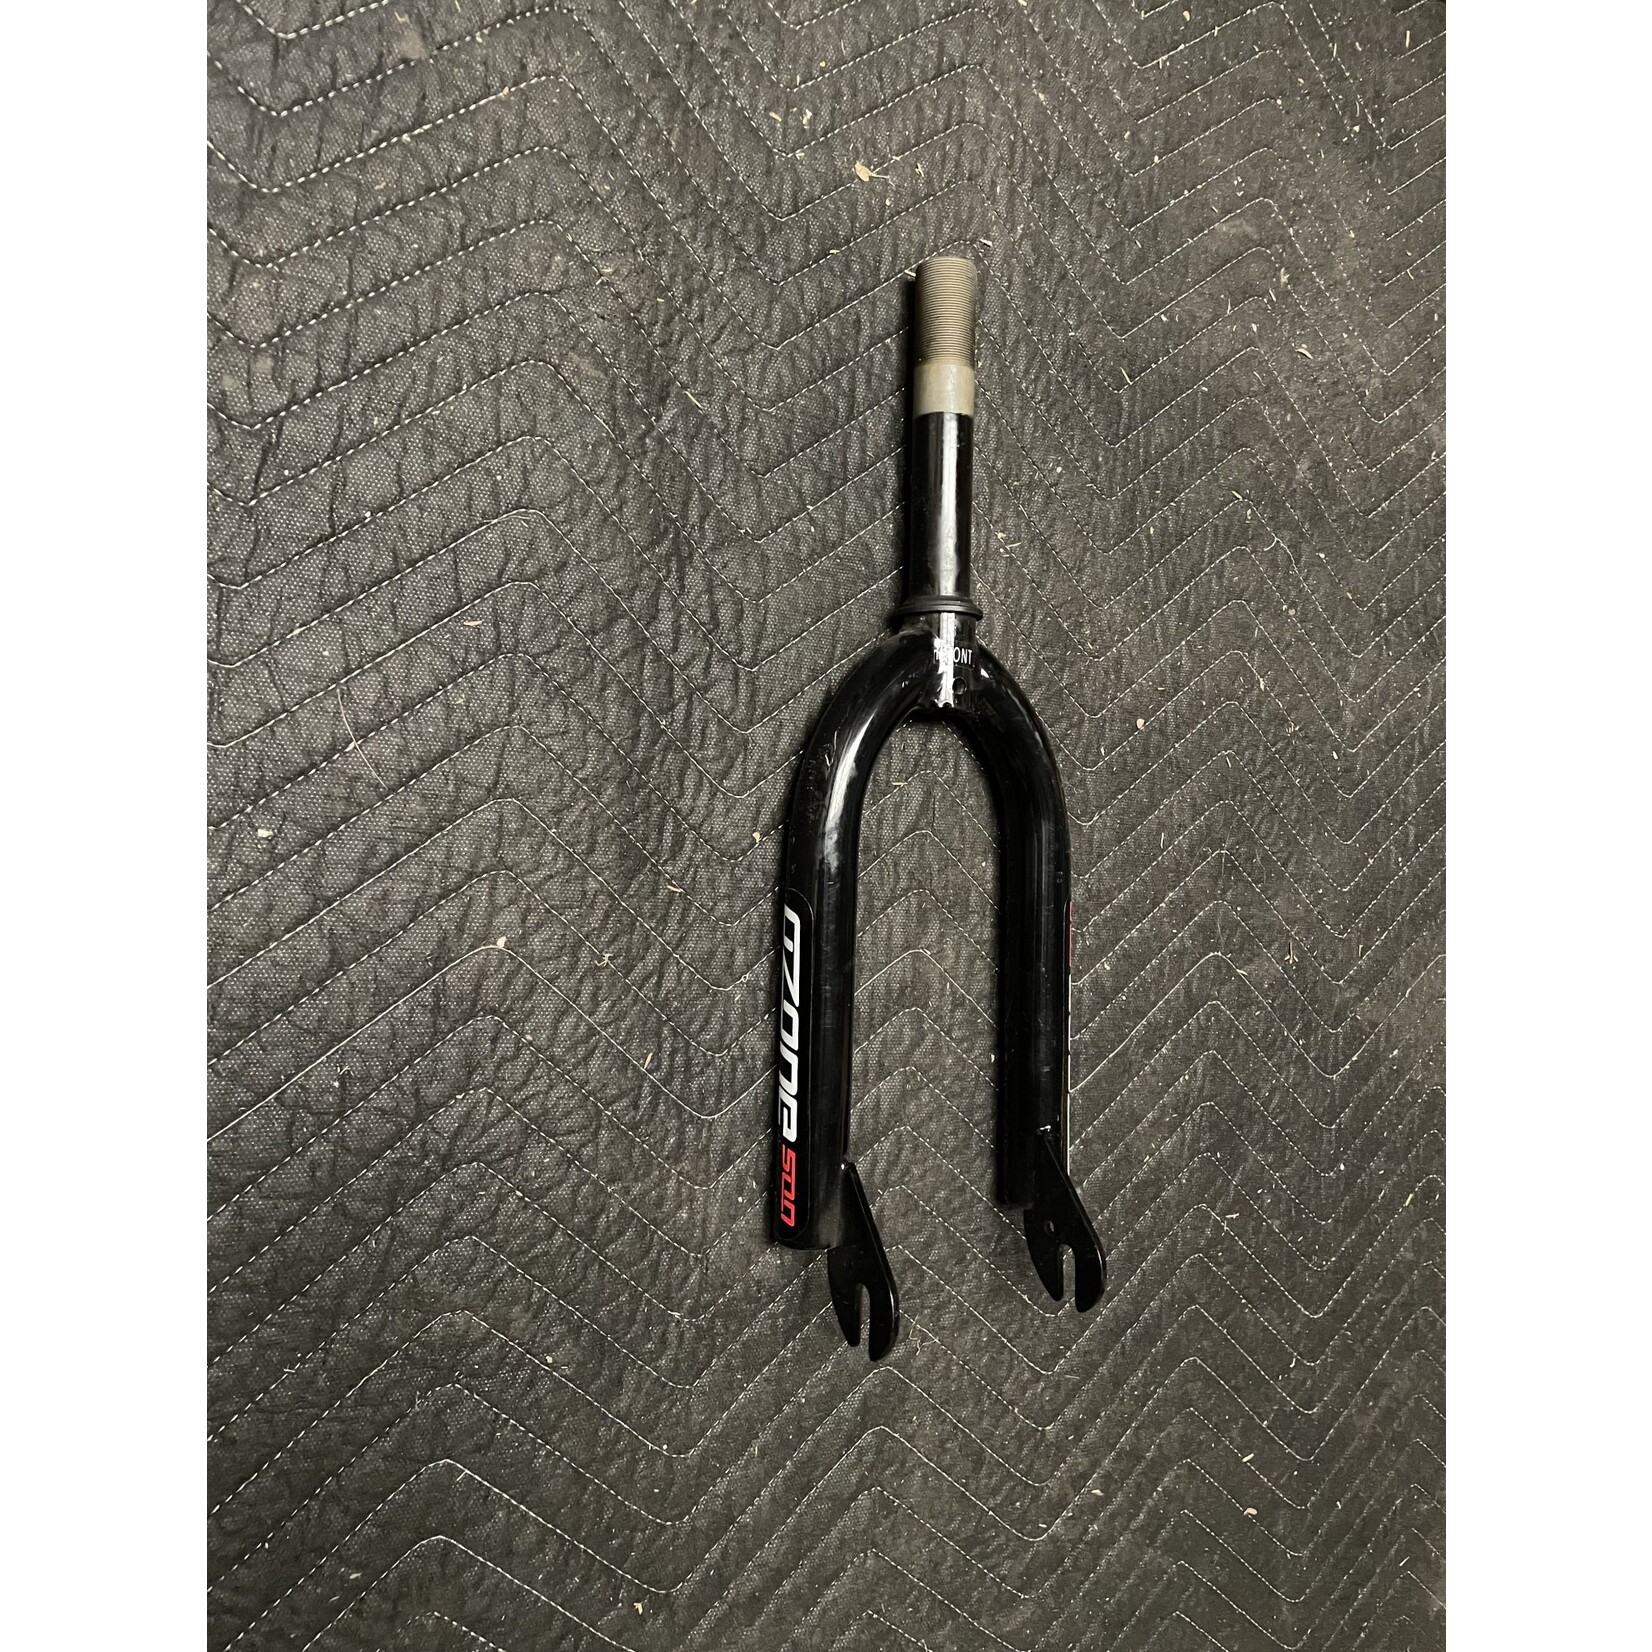 Ozone 500 1" x 5 1/4” Threaded 16" Bicycle Fork (Black/Red)